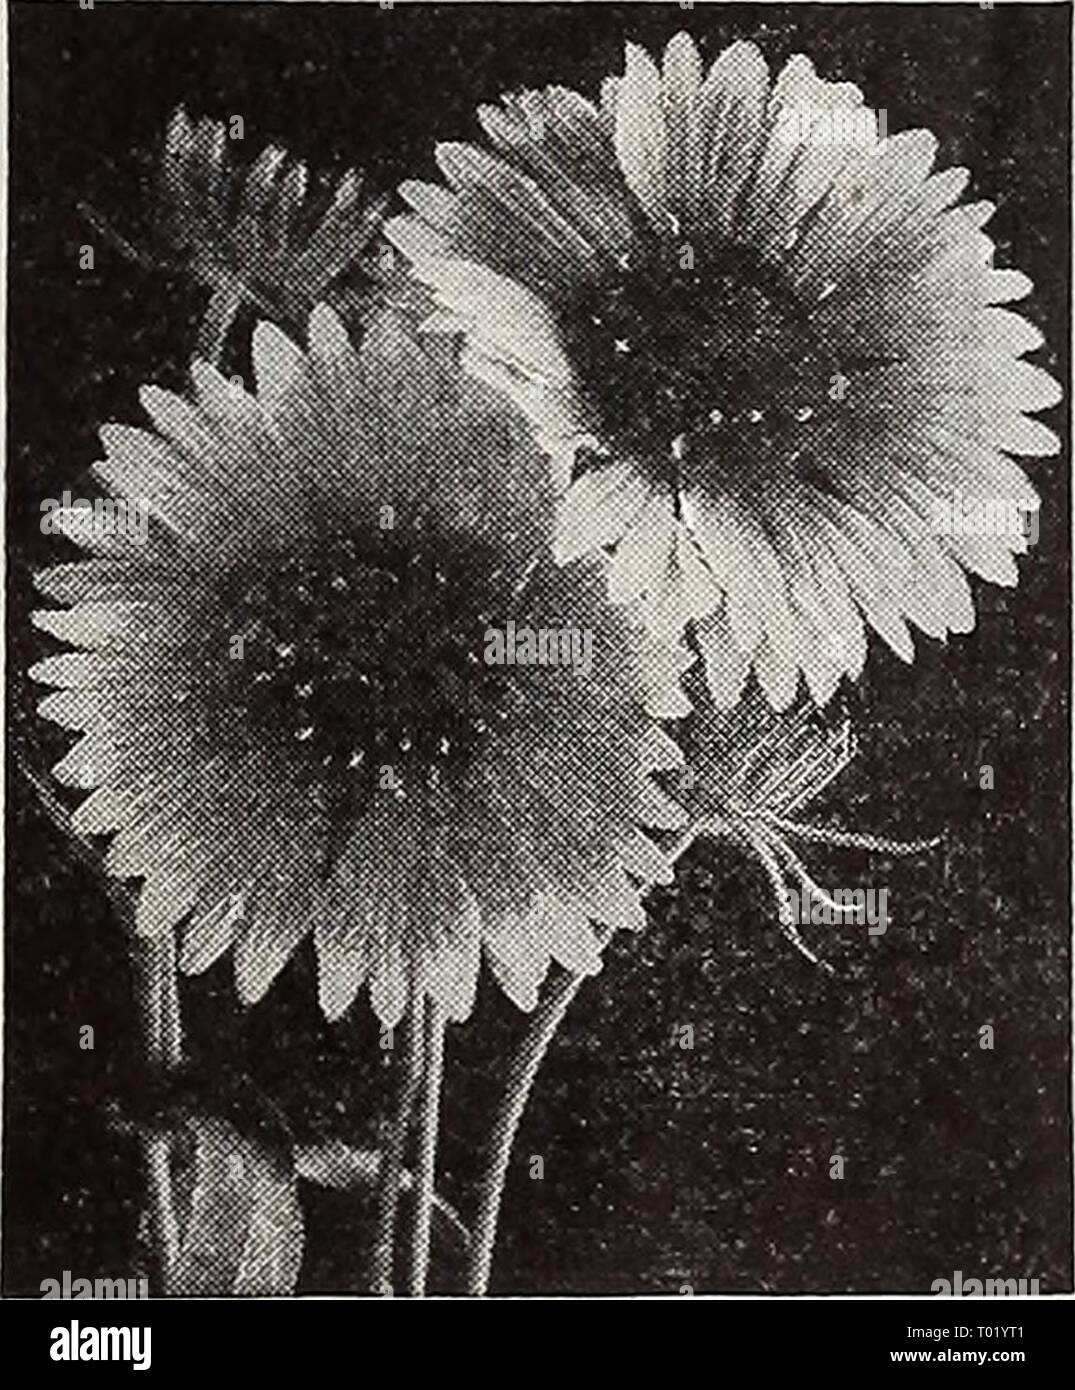 Dreer's garden book for 1940 . dreersgardenbook1940henr Year: 1940  Dimorphotheca, Glistening White Gaillardia Grandiflora M 2441 Goblin Bushy plants only 15 inches tall covered throughout the summer with large, showy, deep red blooms bordered with brilliant yellow. Excellent for beds and borders. Pkt. 20c; special pkt. 75c. 2436 Chloe Large well-formed single blooms of an enticing Indian yellow which is entirely different from all other hardy Gaillardias. A free bloomer, fine for garden display and for cutting. Pkt. 15c; special pkt. 50c.    Dimorphotheca ® 2337 Glistening White You are bound Stock Photo